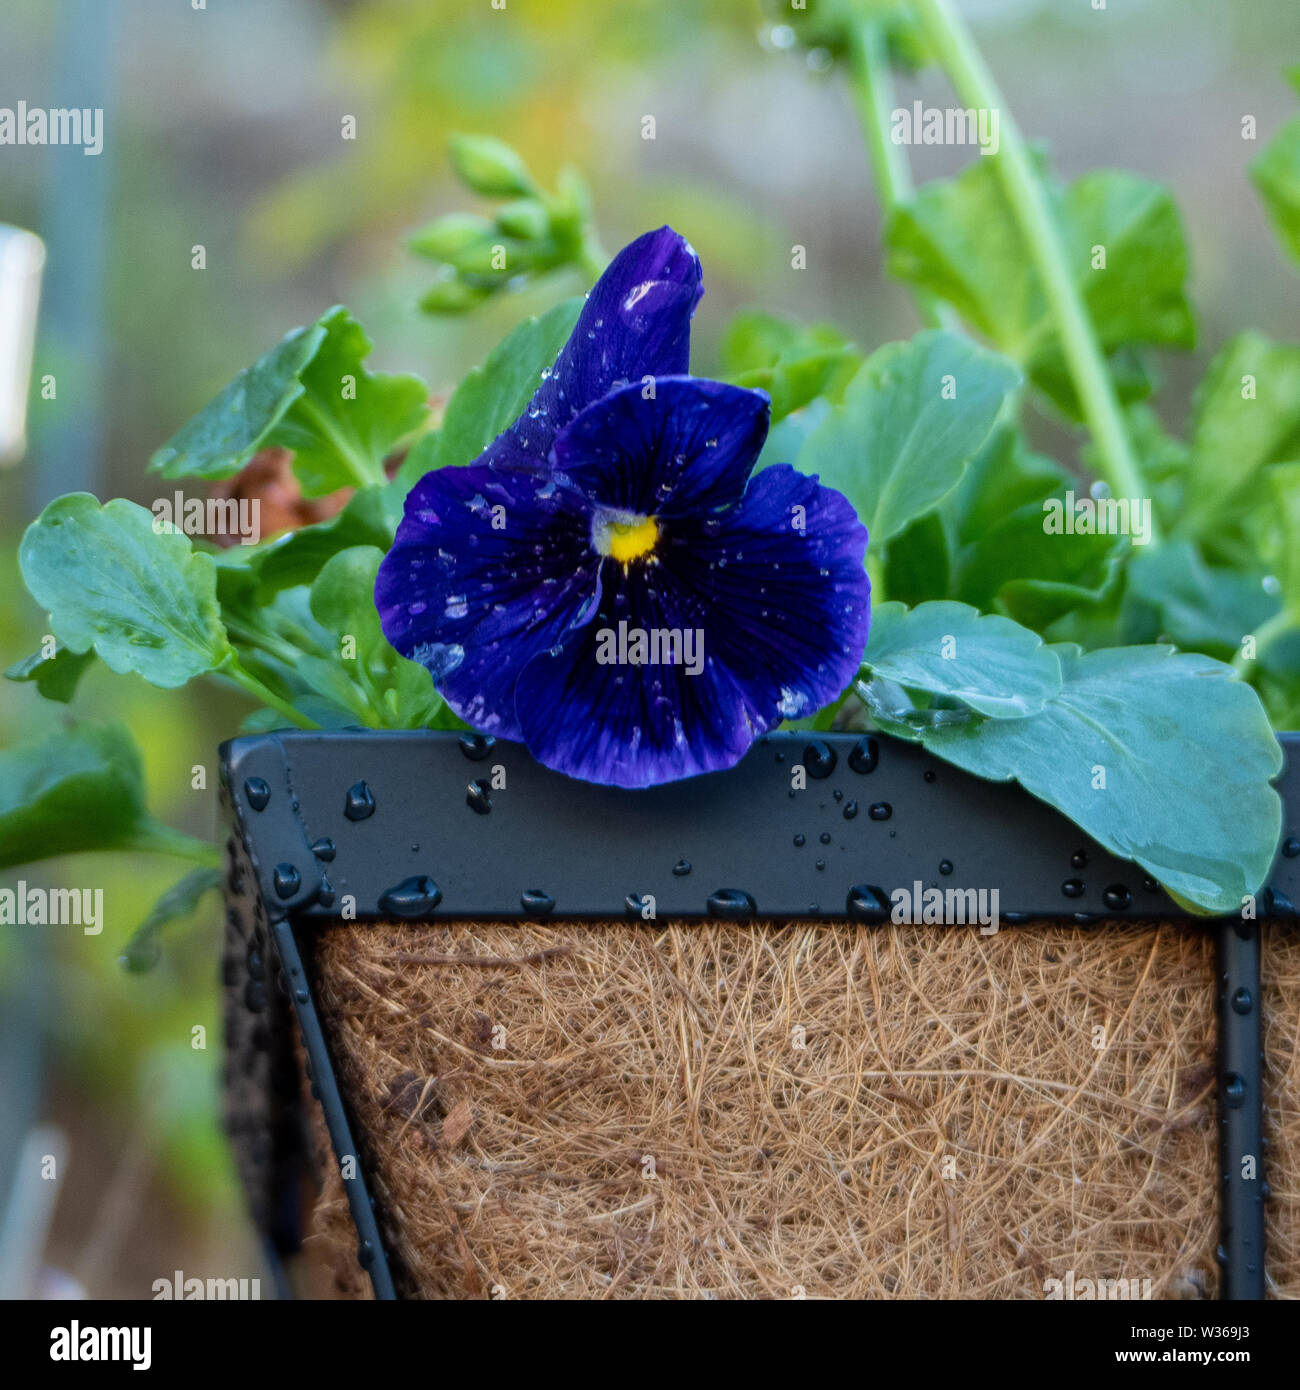 Pansy Flowers in the garden, fresh wet Violet and black and indigo purple flower covered in raindrops peeking from a hanging basket. Winter colour Stock Photo